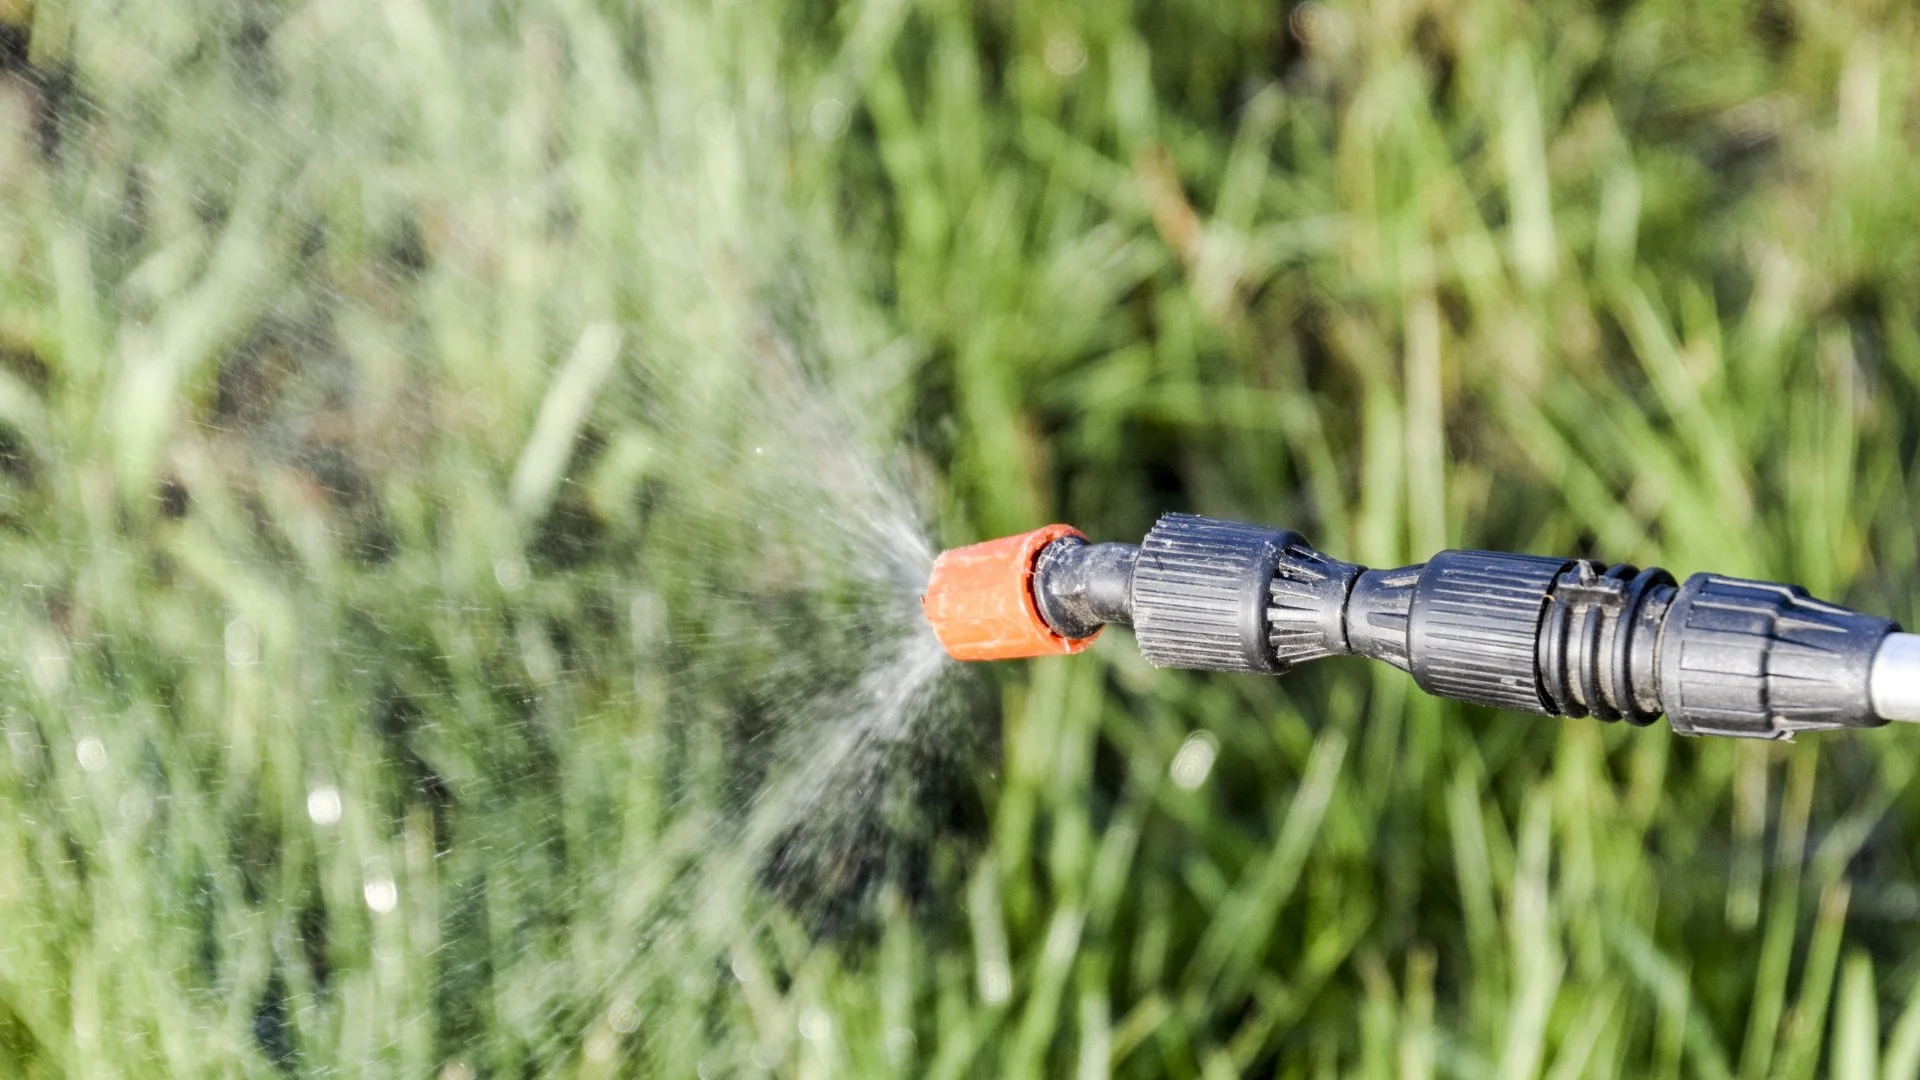 Do I Really Need to Use a Pre-Emergent Weed Control Treatment This Year?